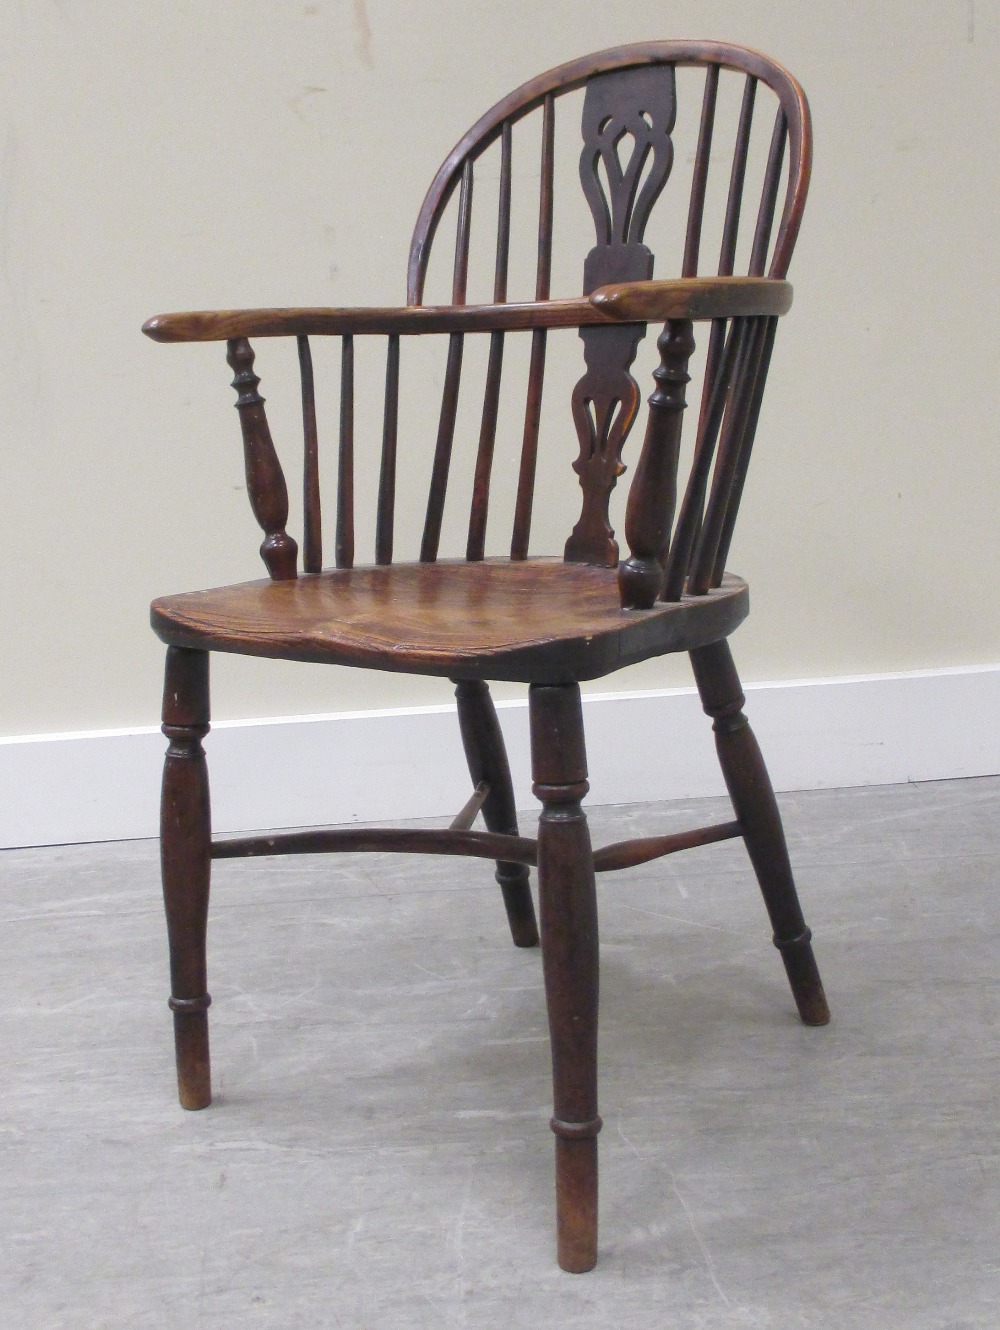 An ash and elm seated windsor chair